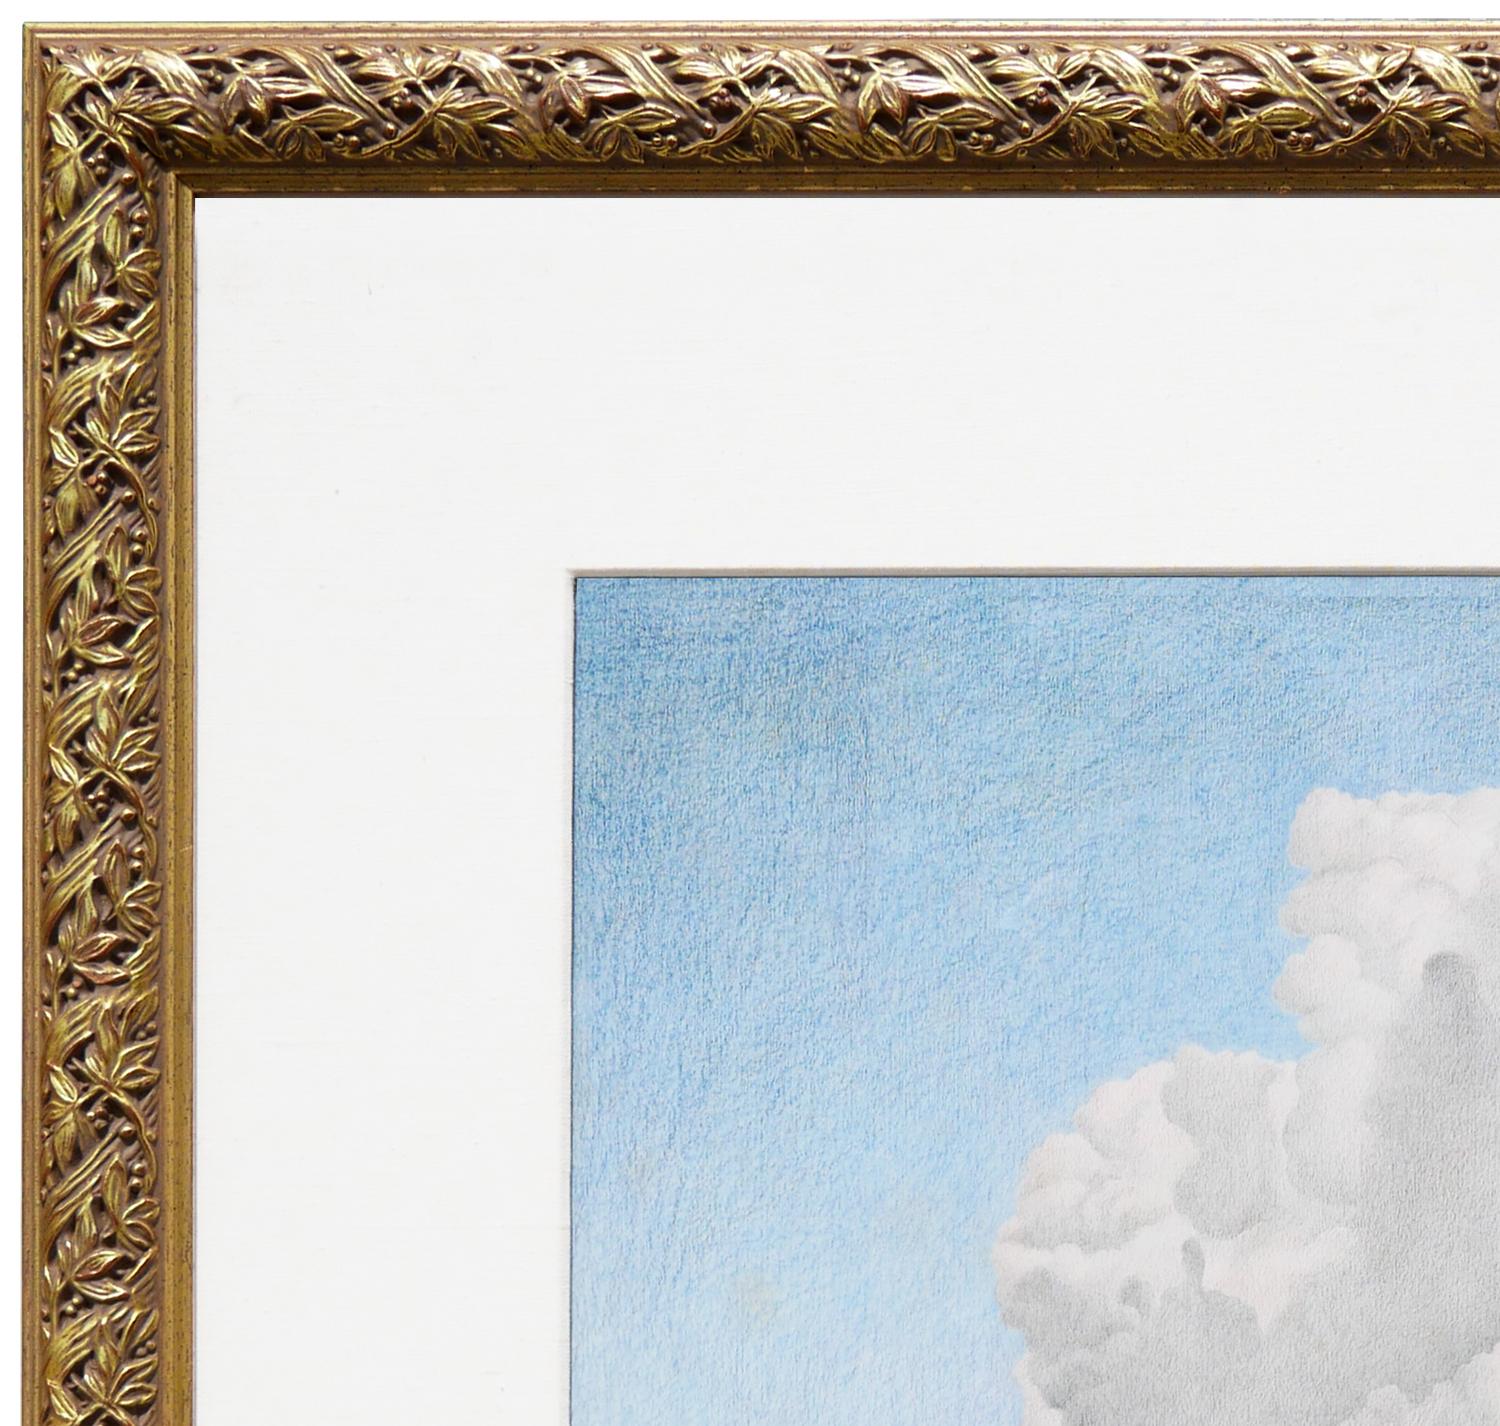 Pastel blue, gray and white abstract surrealist drawing by artist T. Moore. The drawing depicts a calm ocean under a big white cloud. This piece has some impeccable details and is a fine work of art. Signed by the artist at the bottom right.